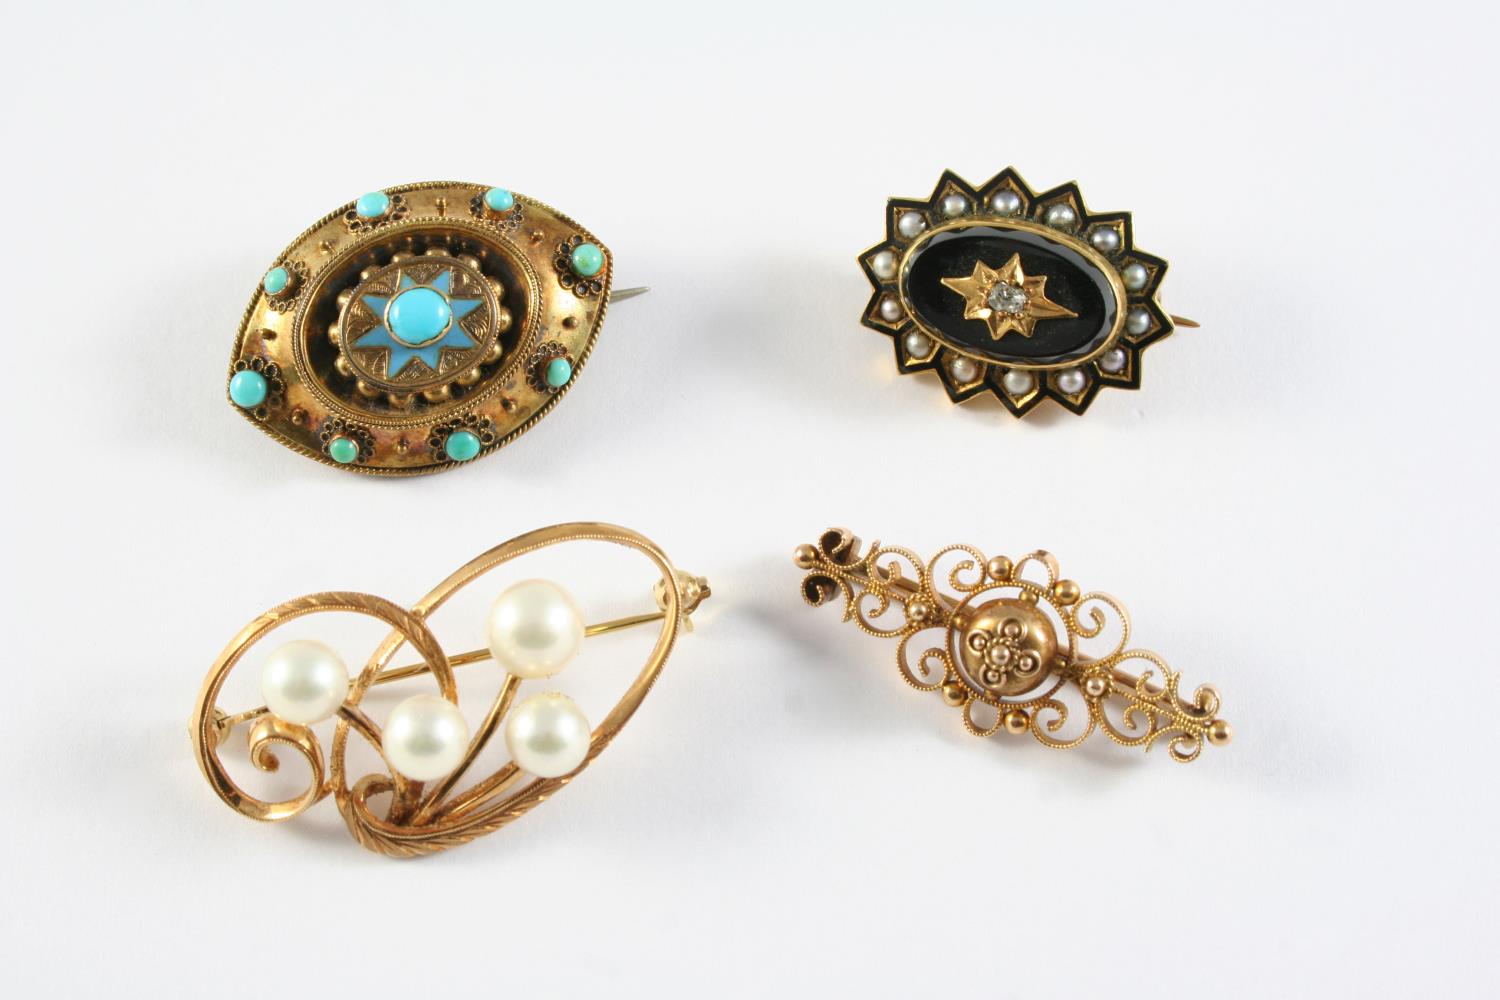 A VICTORIAN GOLD AND TURQUOISE BROOCH the oval gold mount is set with turquoise cabochons, with